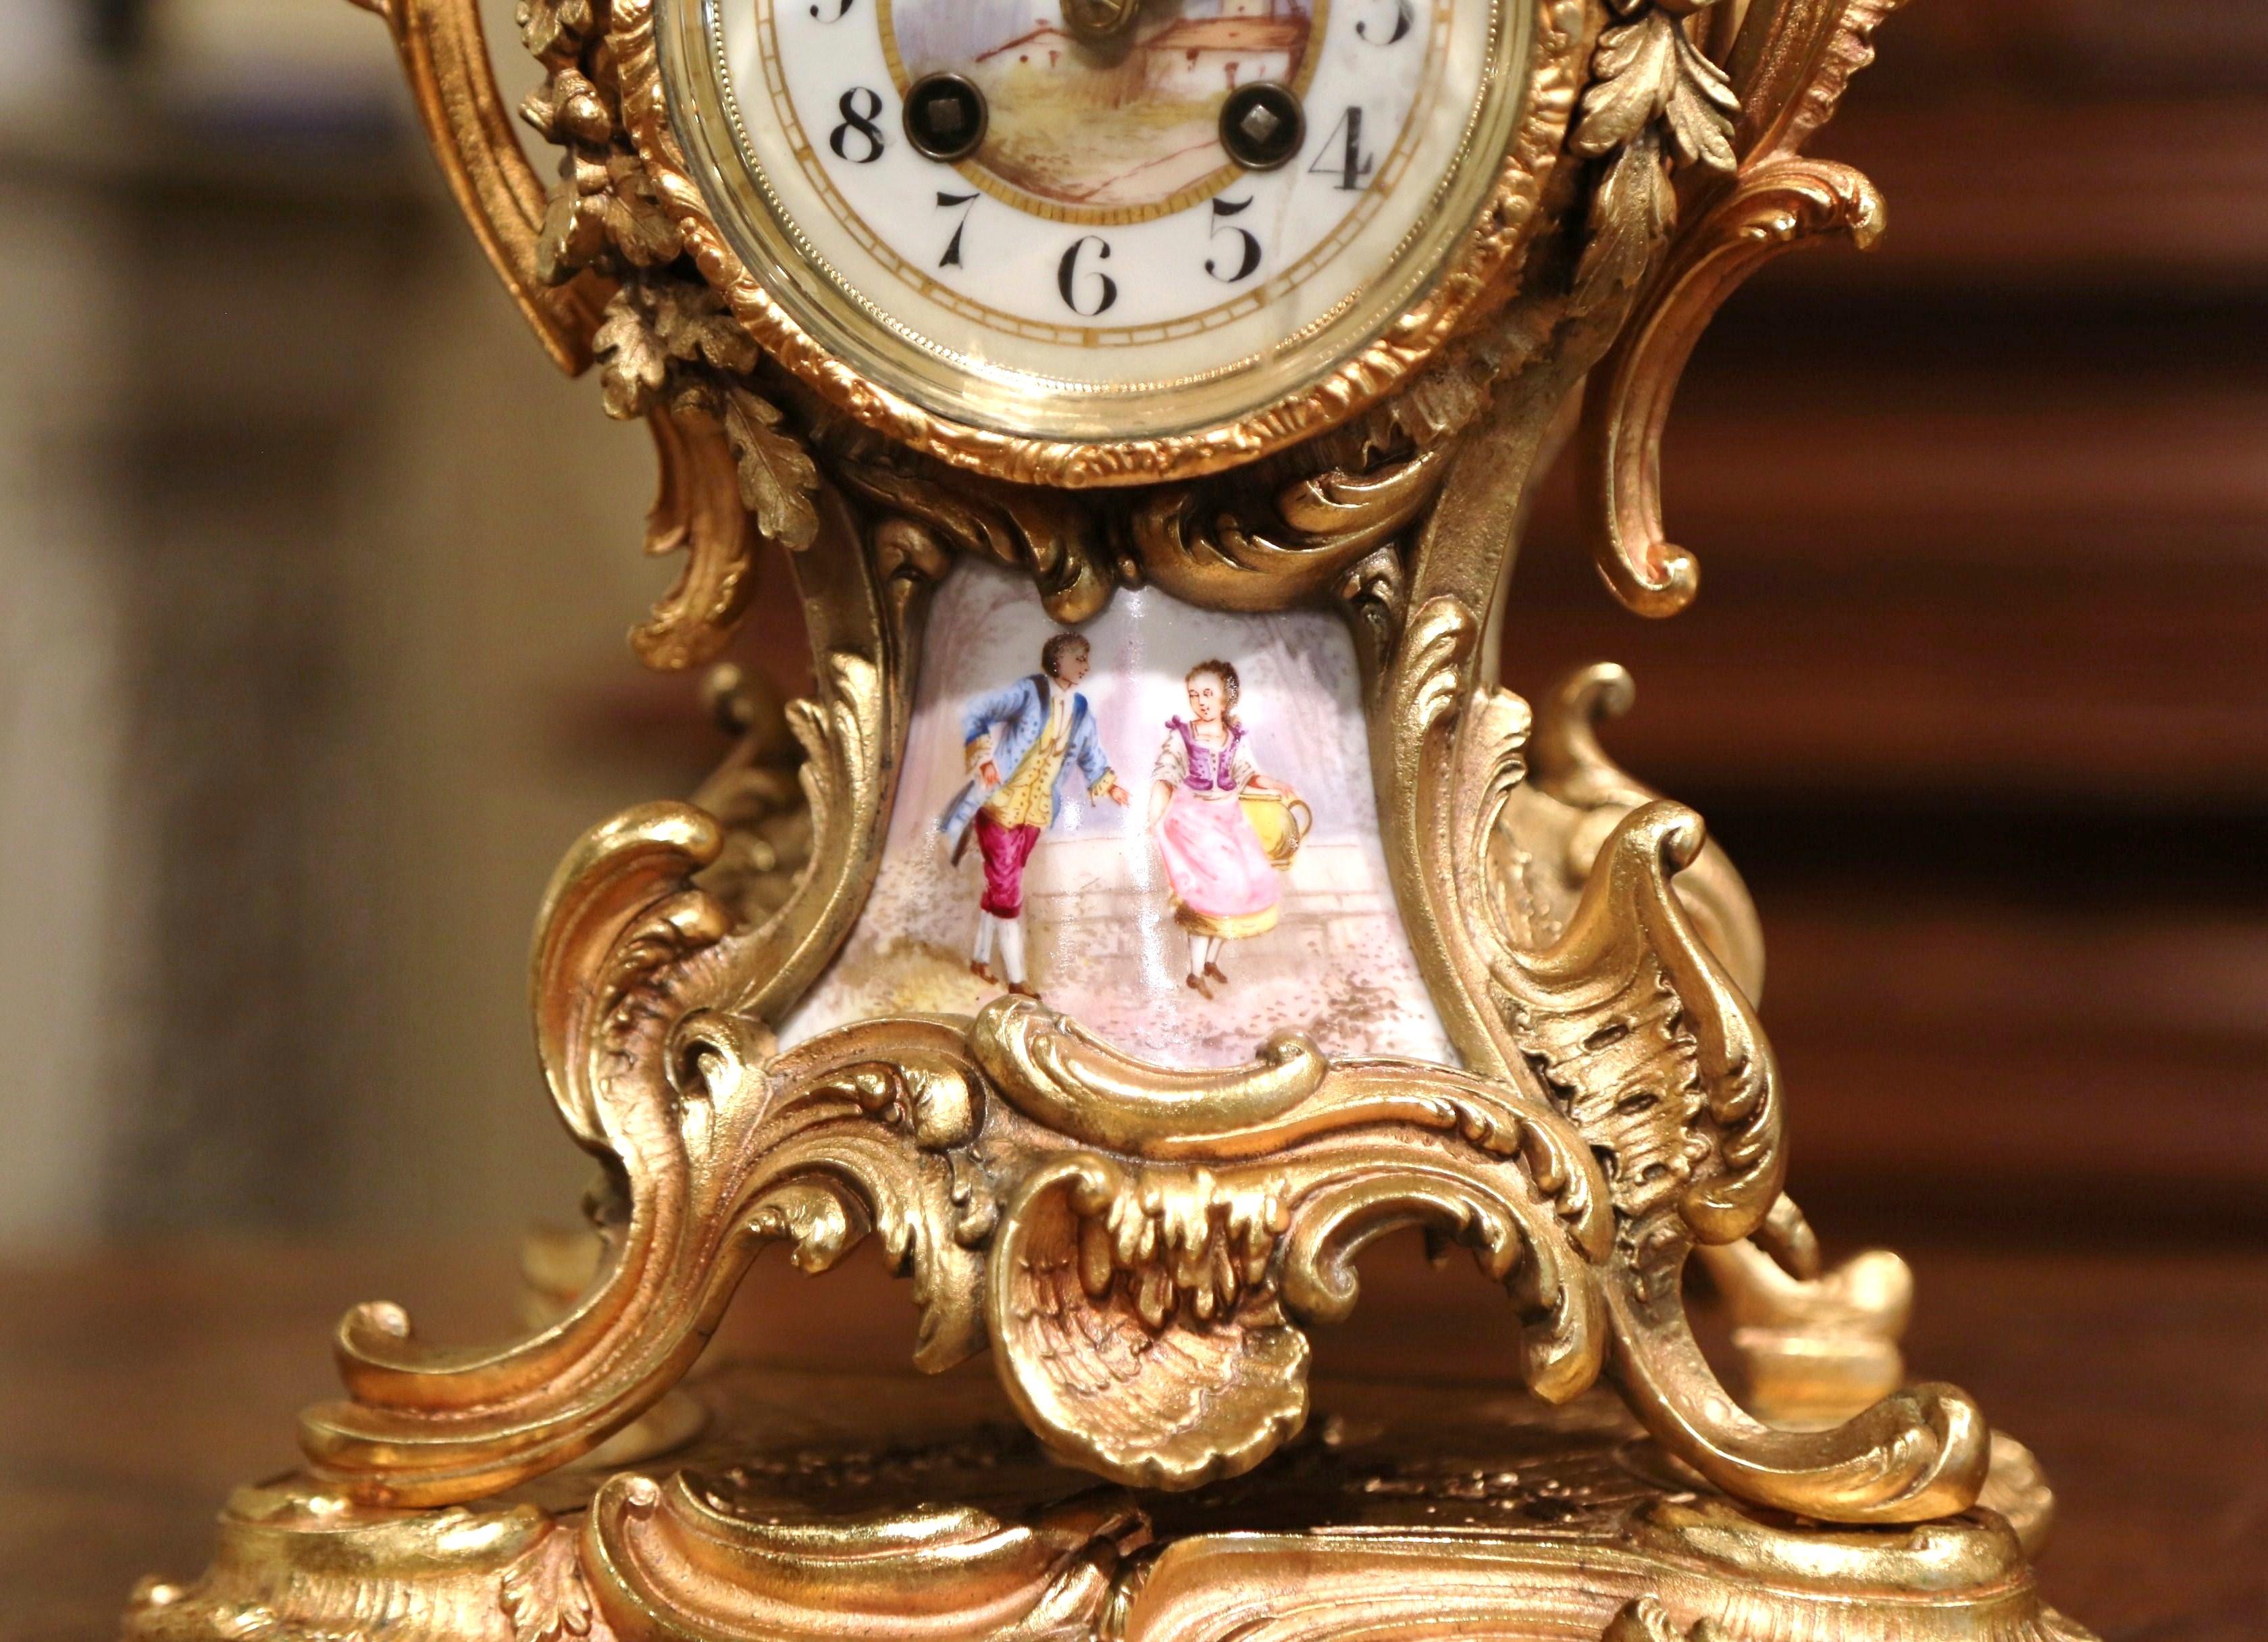 Hand-Carved 19th Century French Louis XV Rococo Bronze Dore and Porcelain Mantel Clock